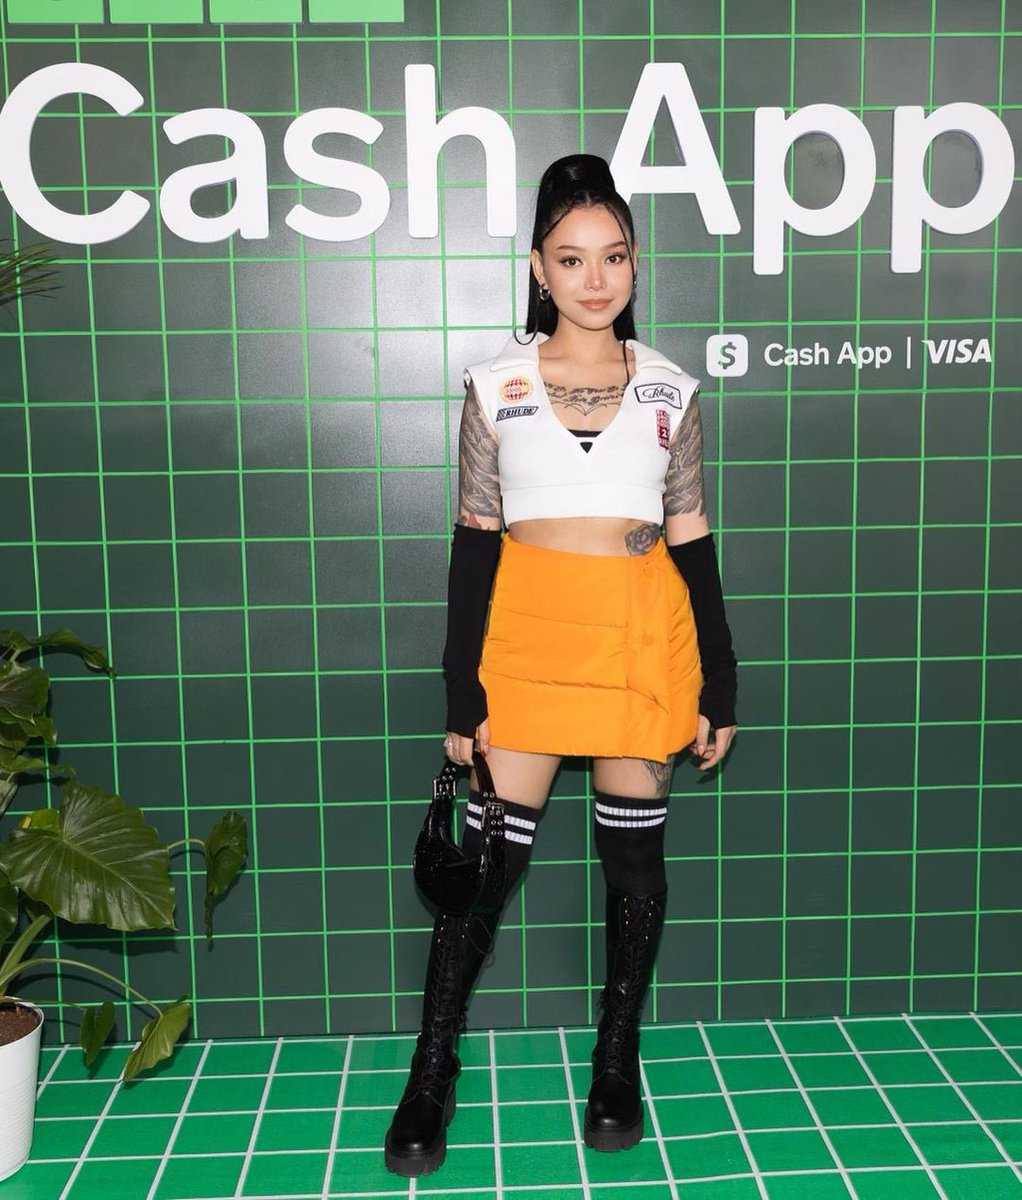 Vroom vroom🏎️💨 had such an amazing time at Club Cash App for my first F1 race🍩🏁 @CashApp